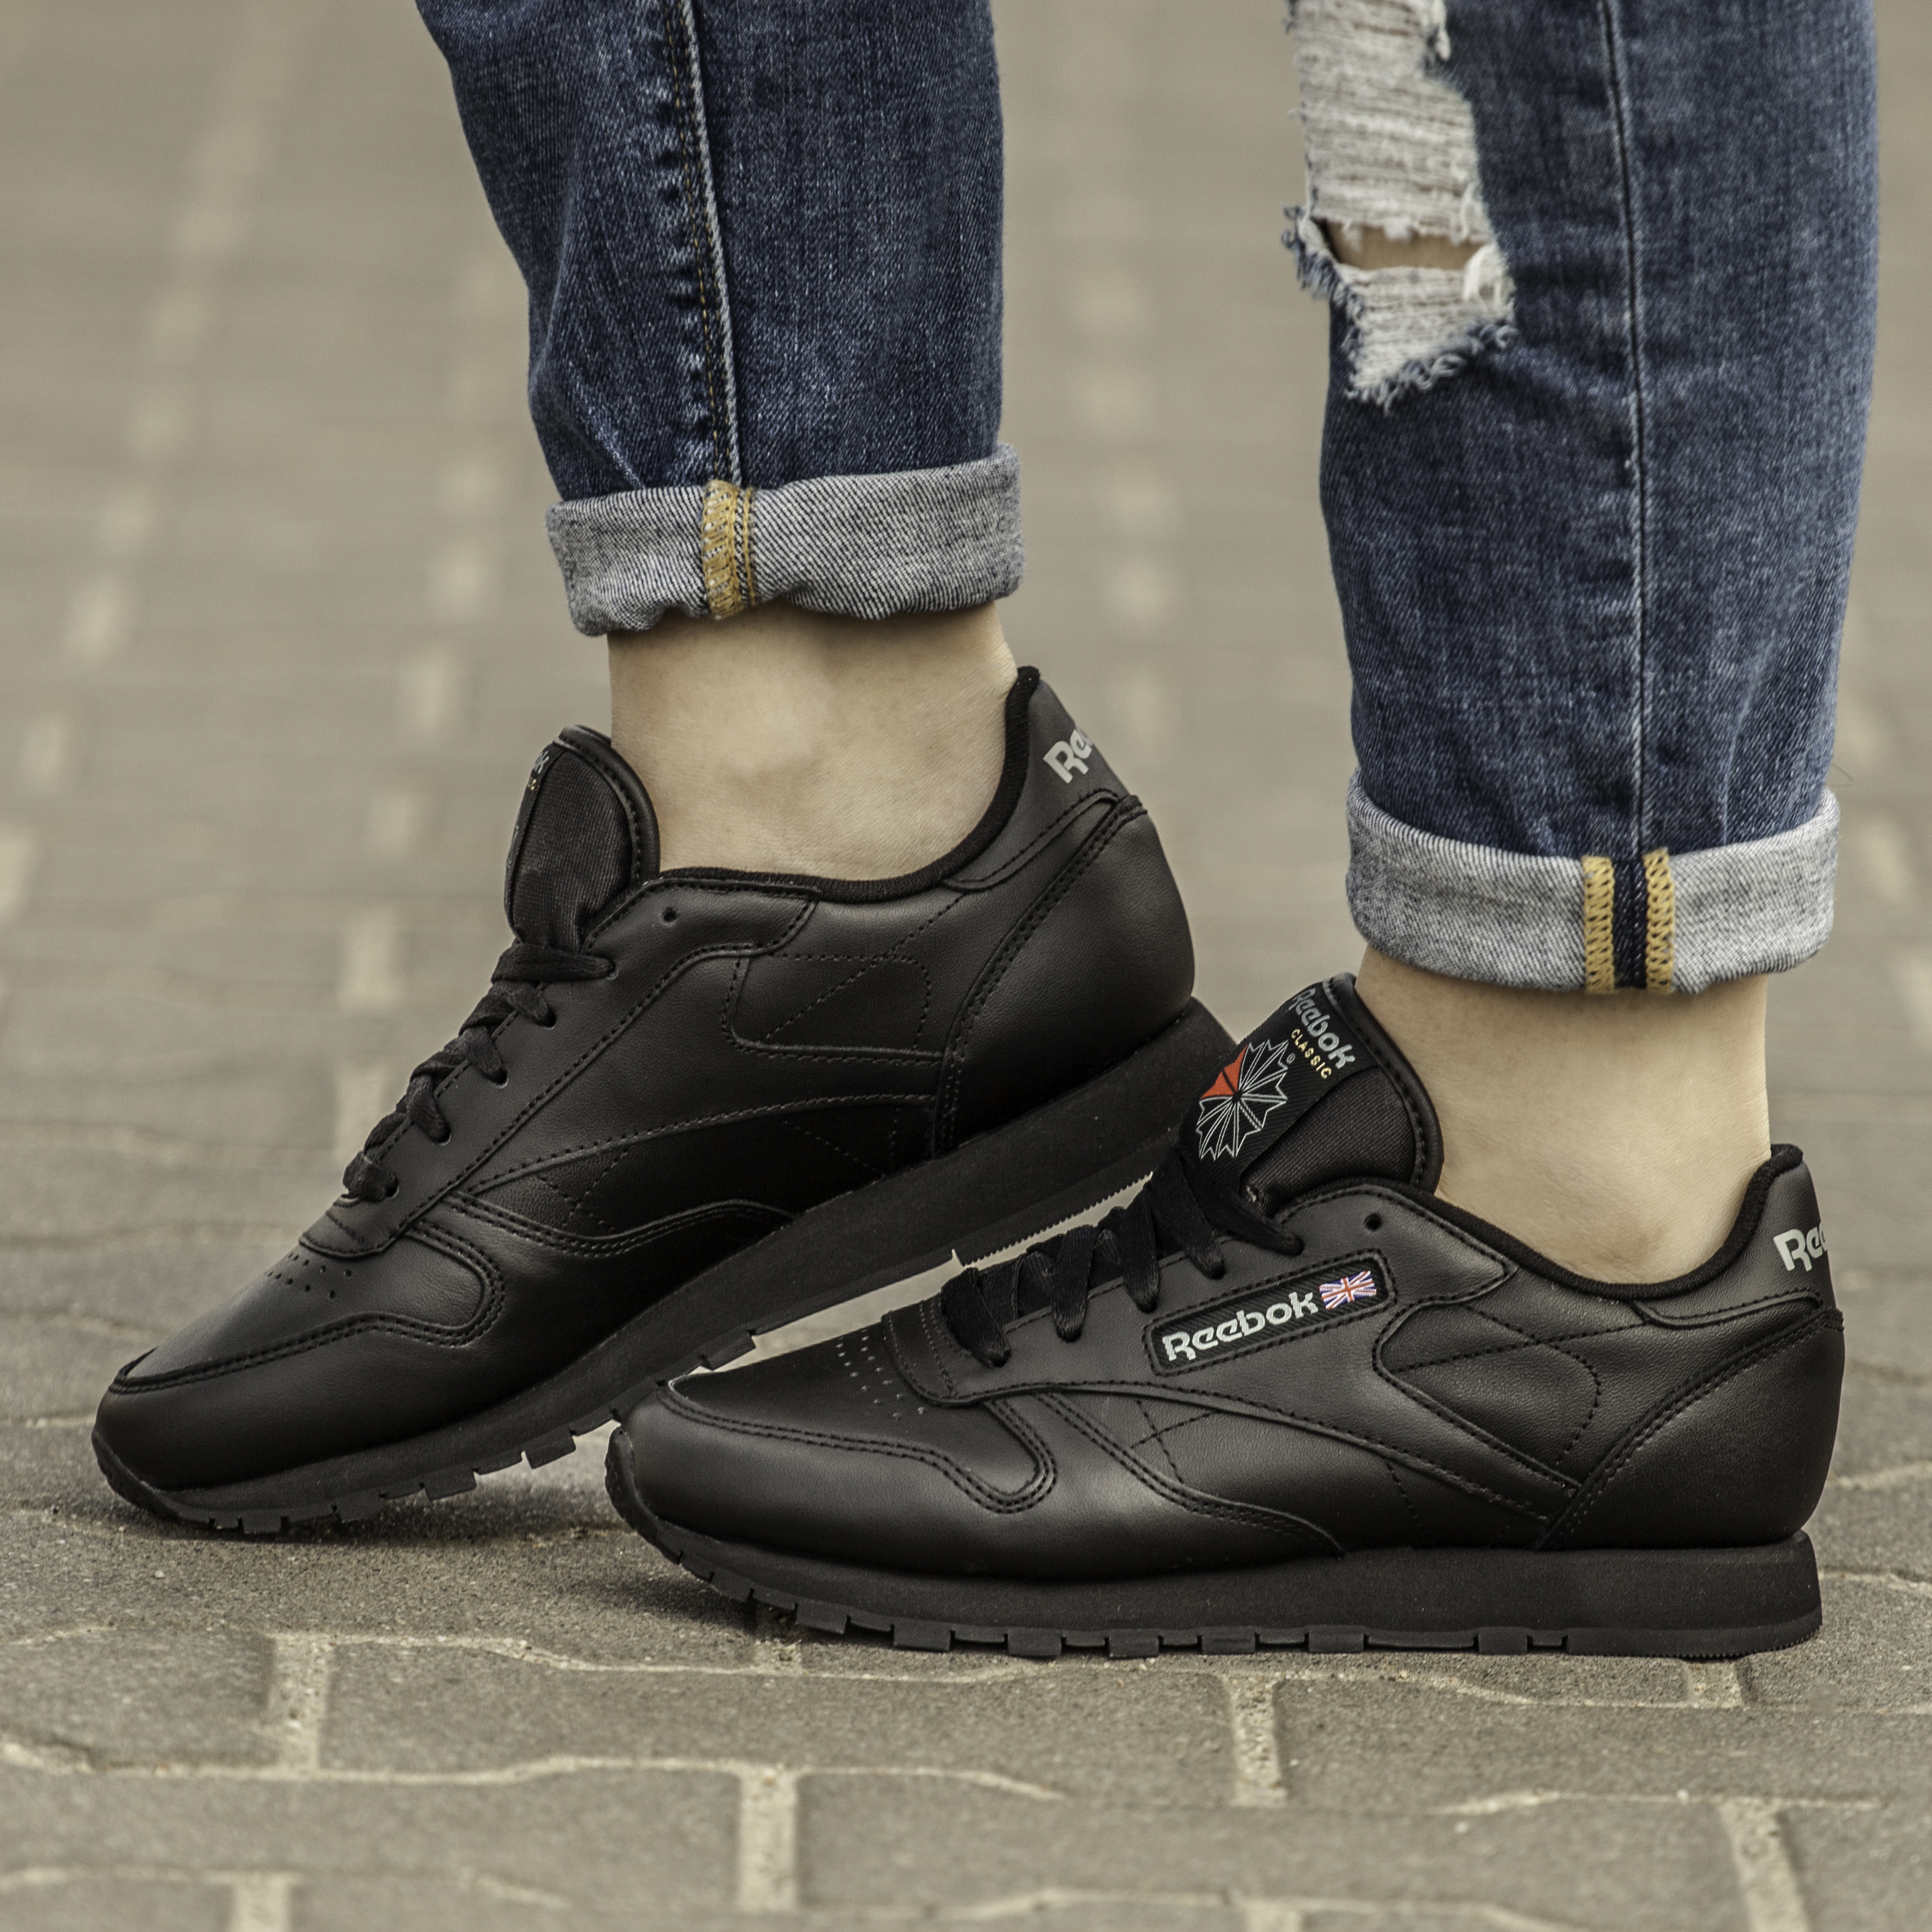 reebok d classic leather 912 off 53 